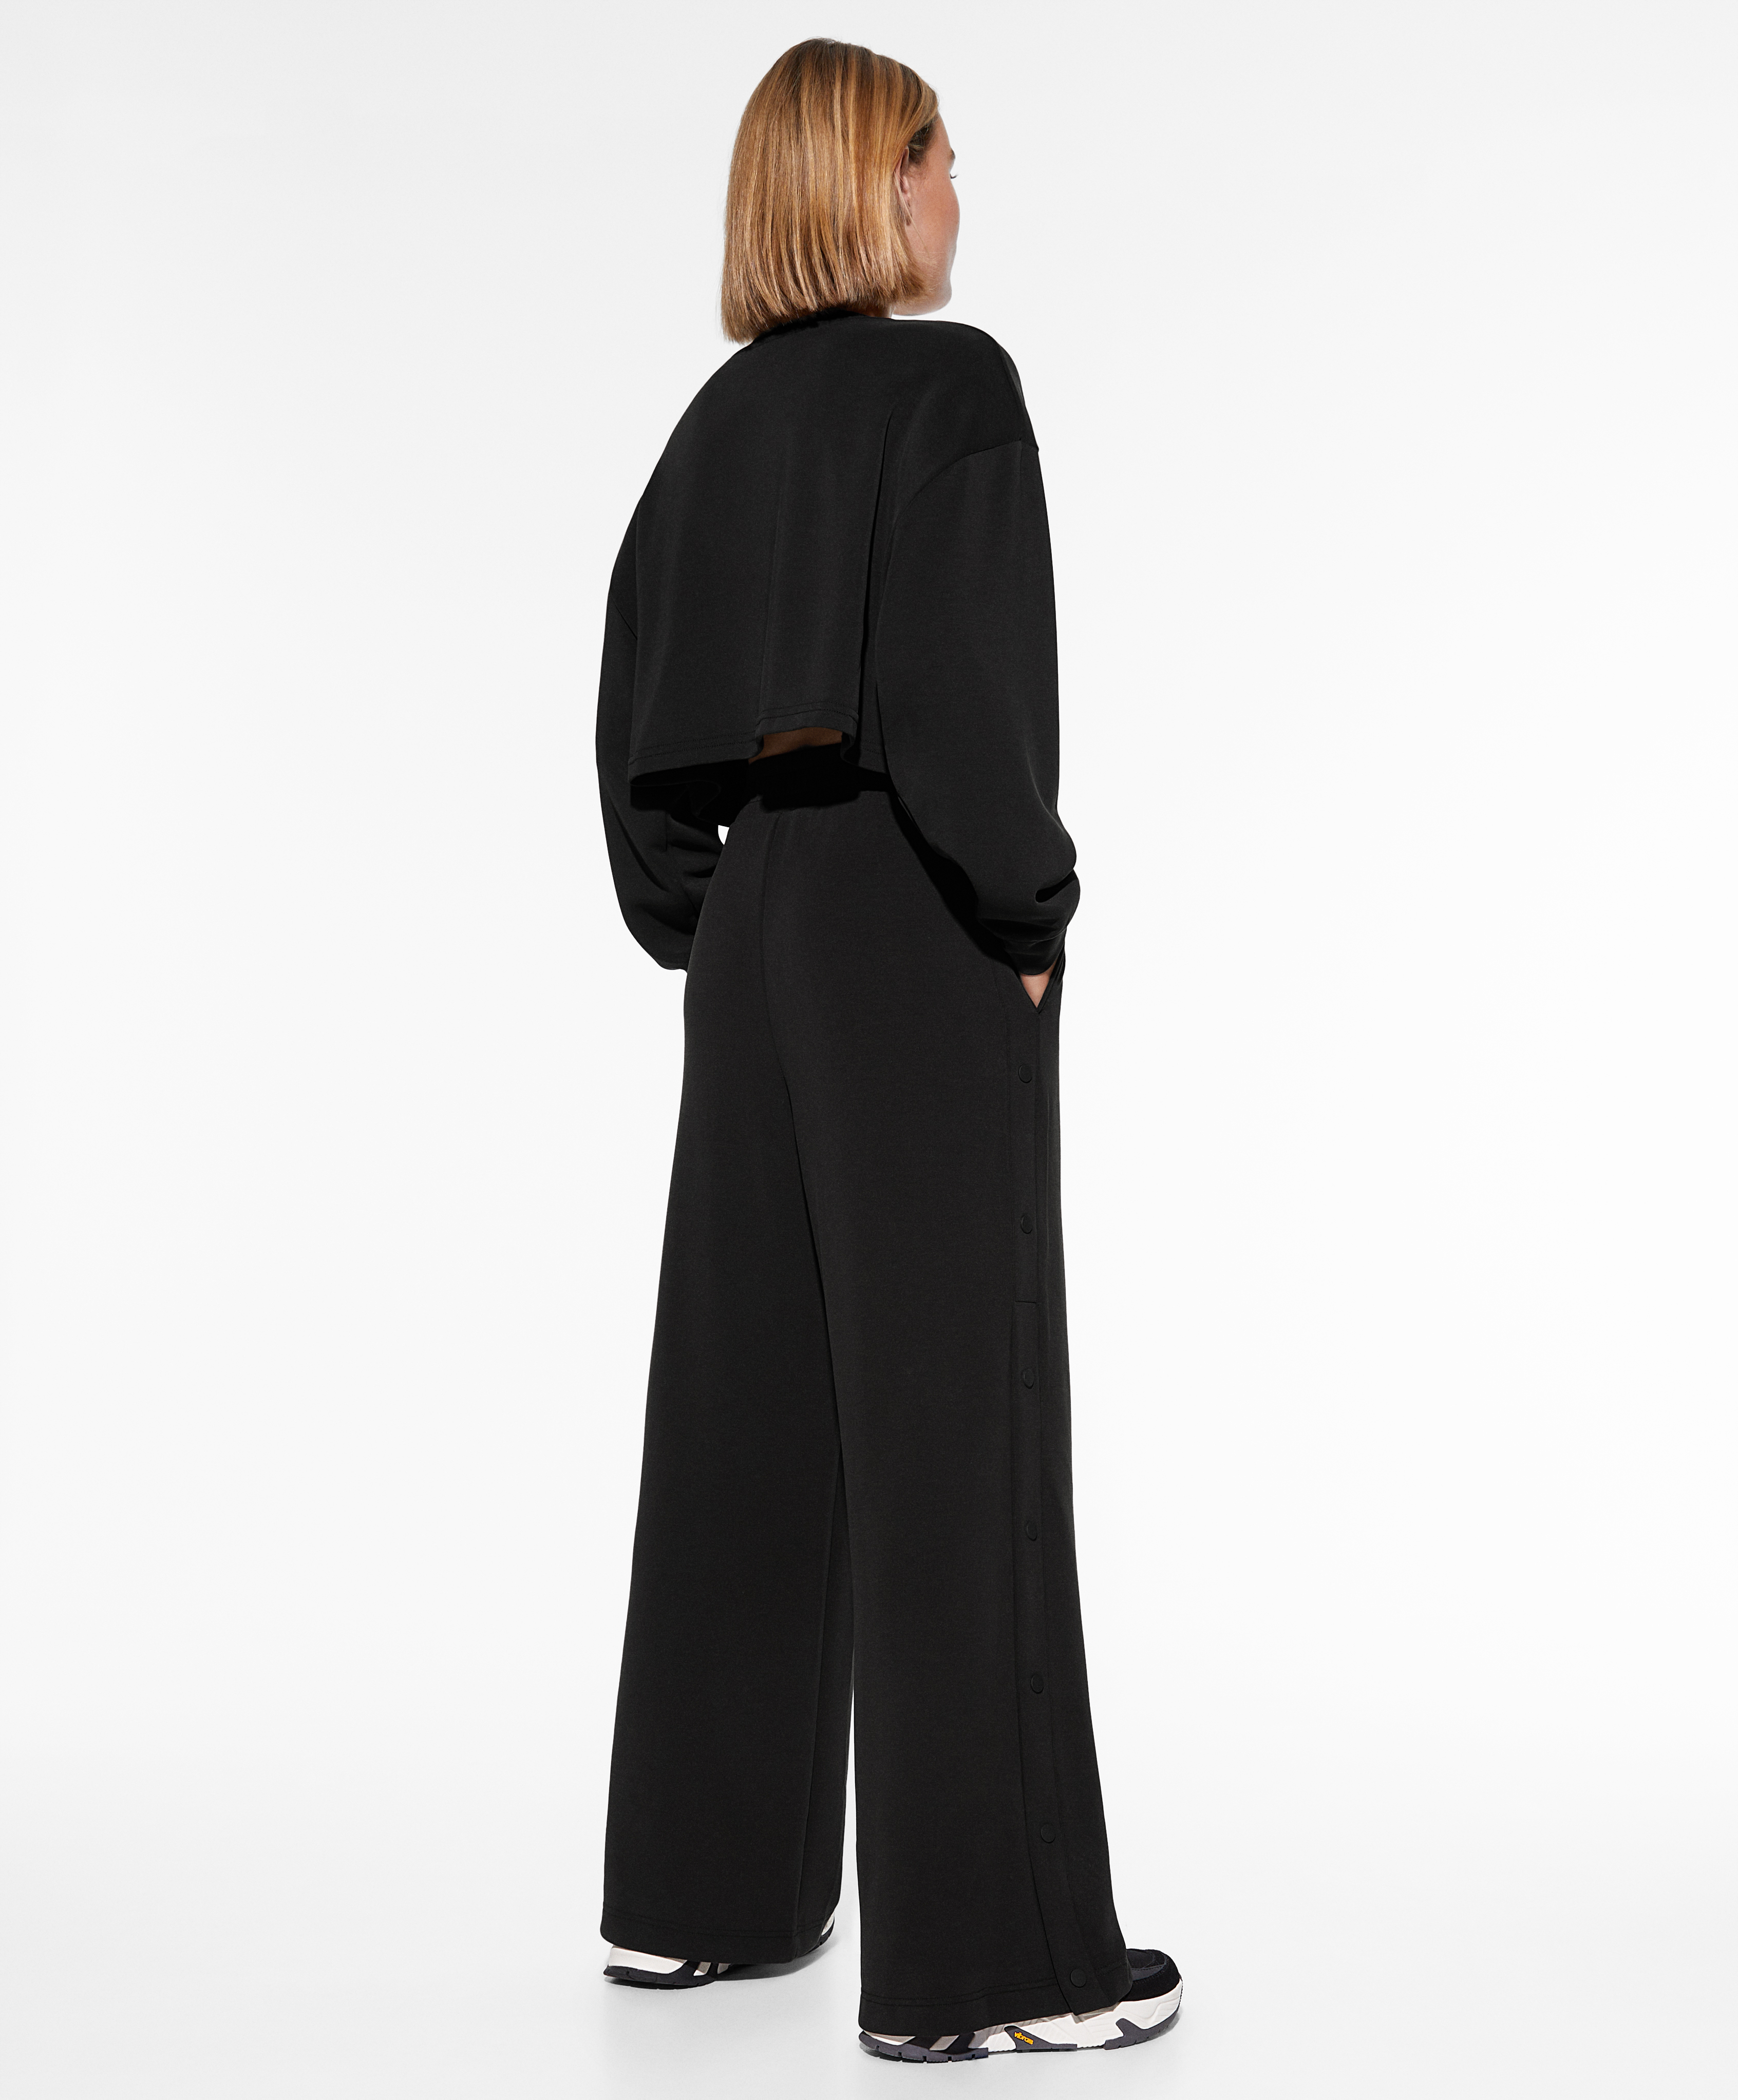 Black long total look with modal